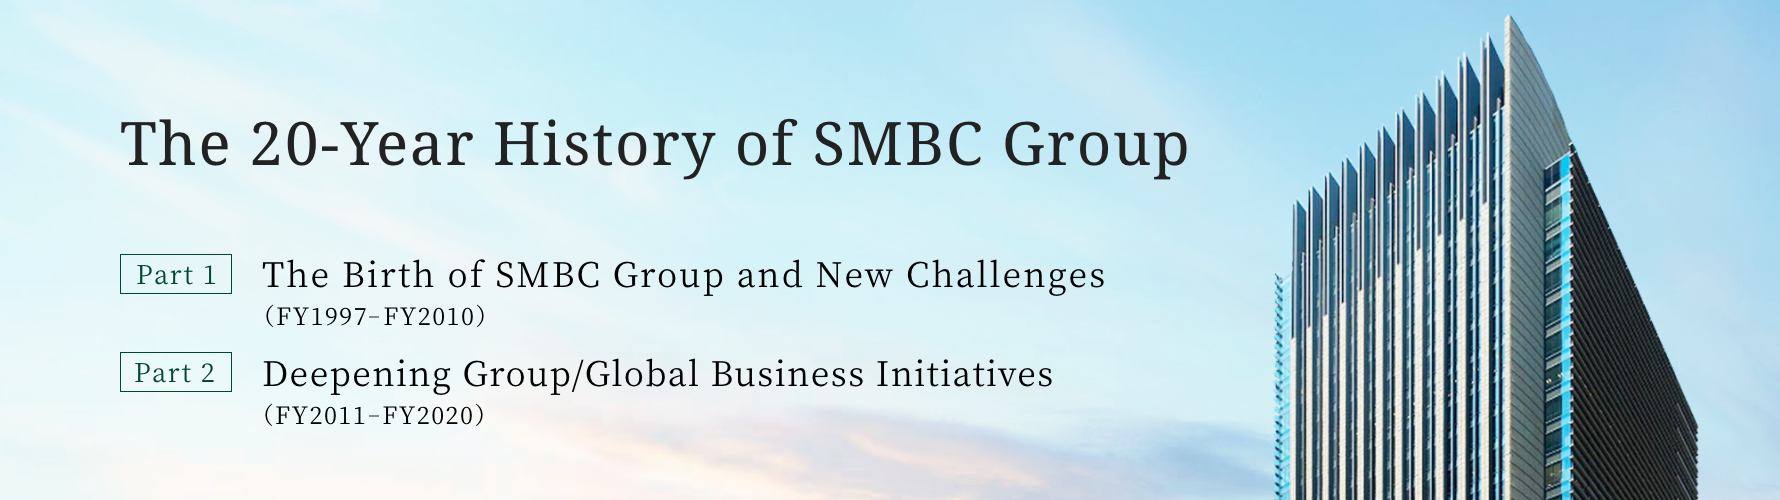 The 20-Year History of SMBC Group